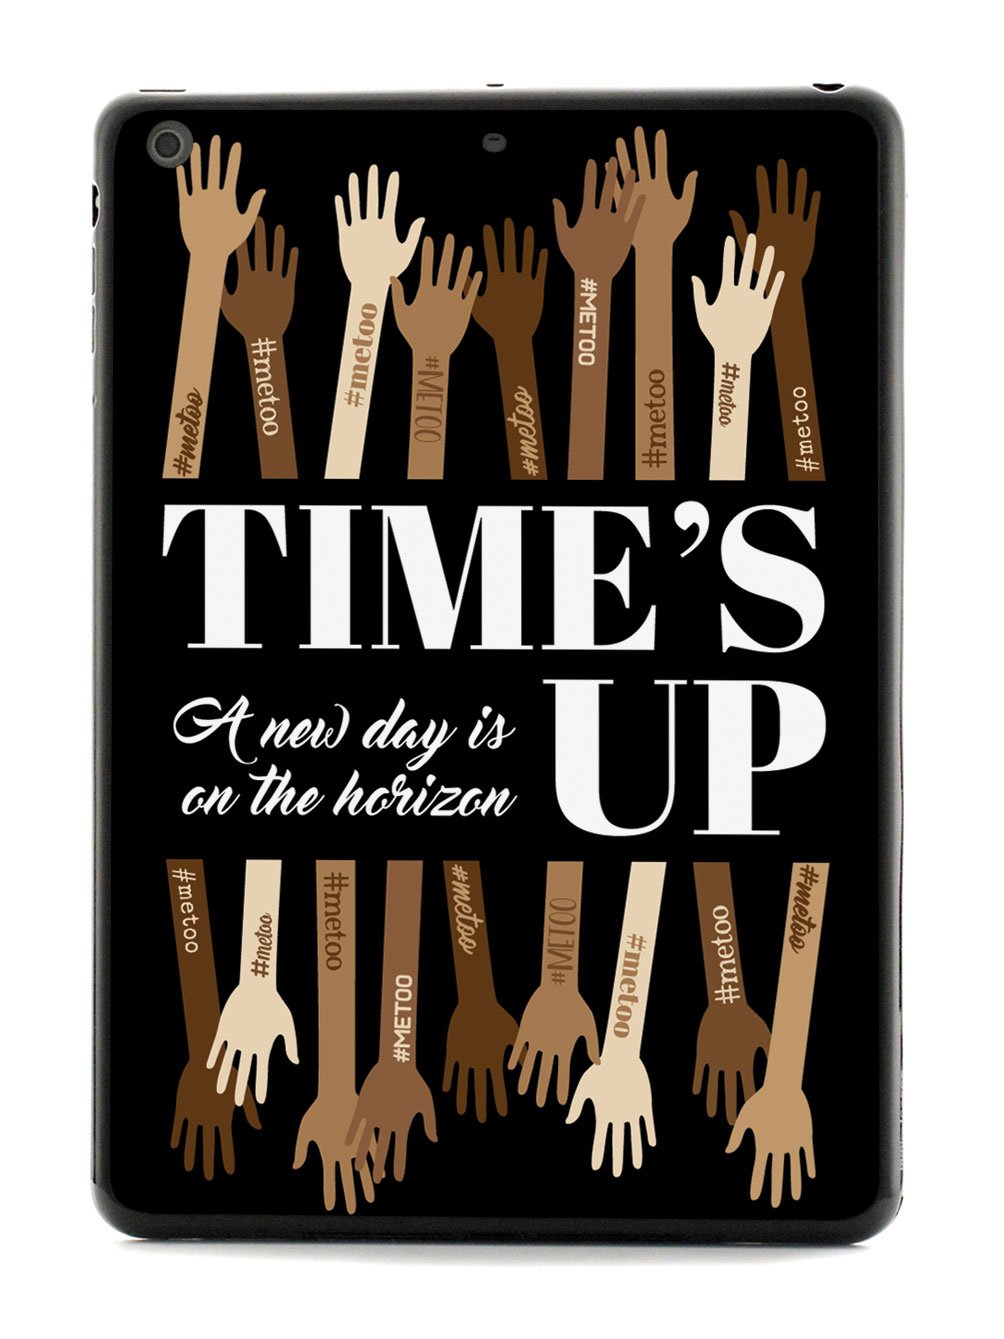 Time's Up - A New Day is on the Horizon - #MeToo - Black Case